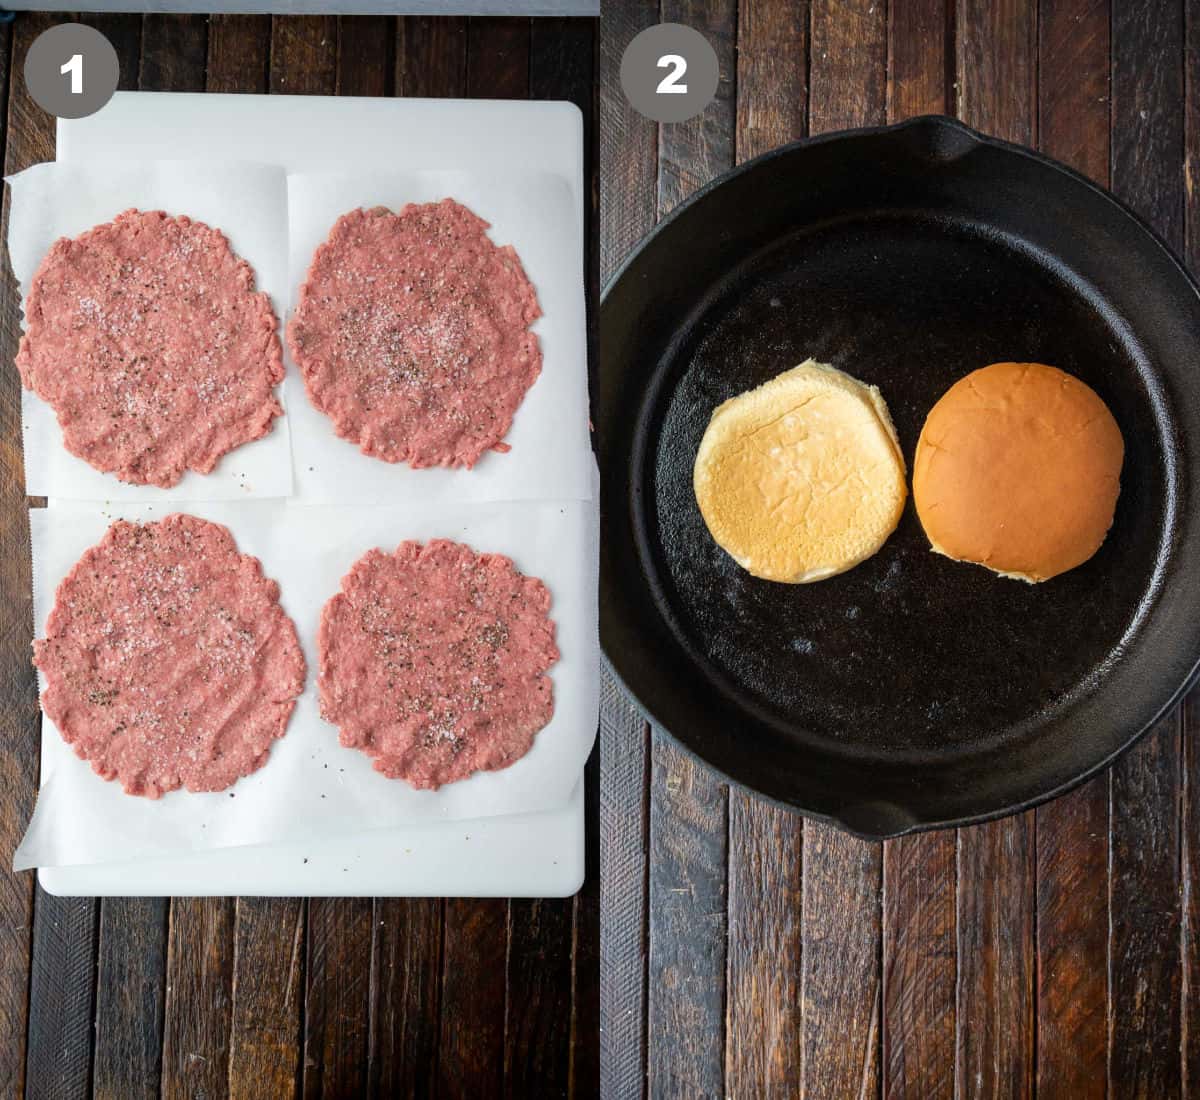 Ground beef patties on a cutting board, and the buns placed in a hot skillet.